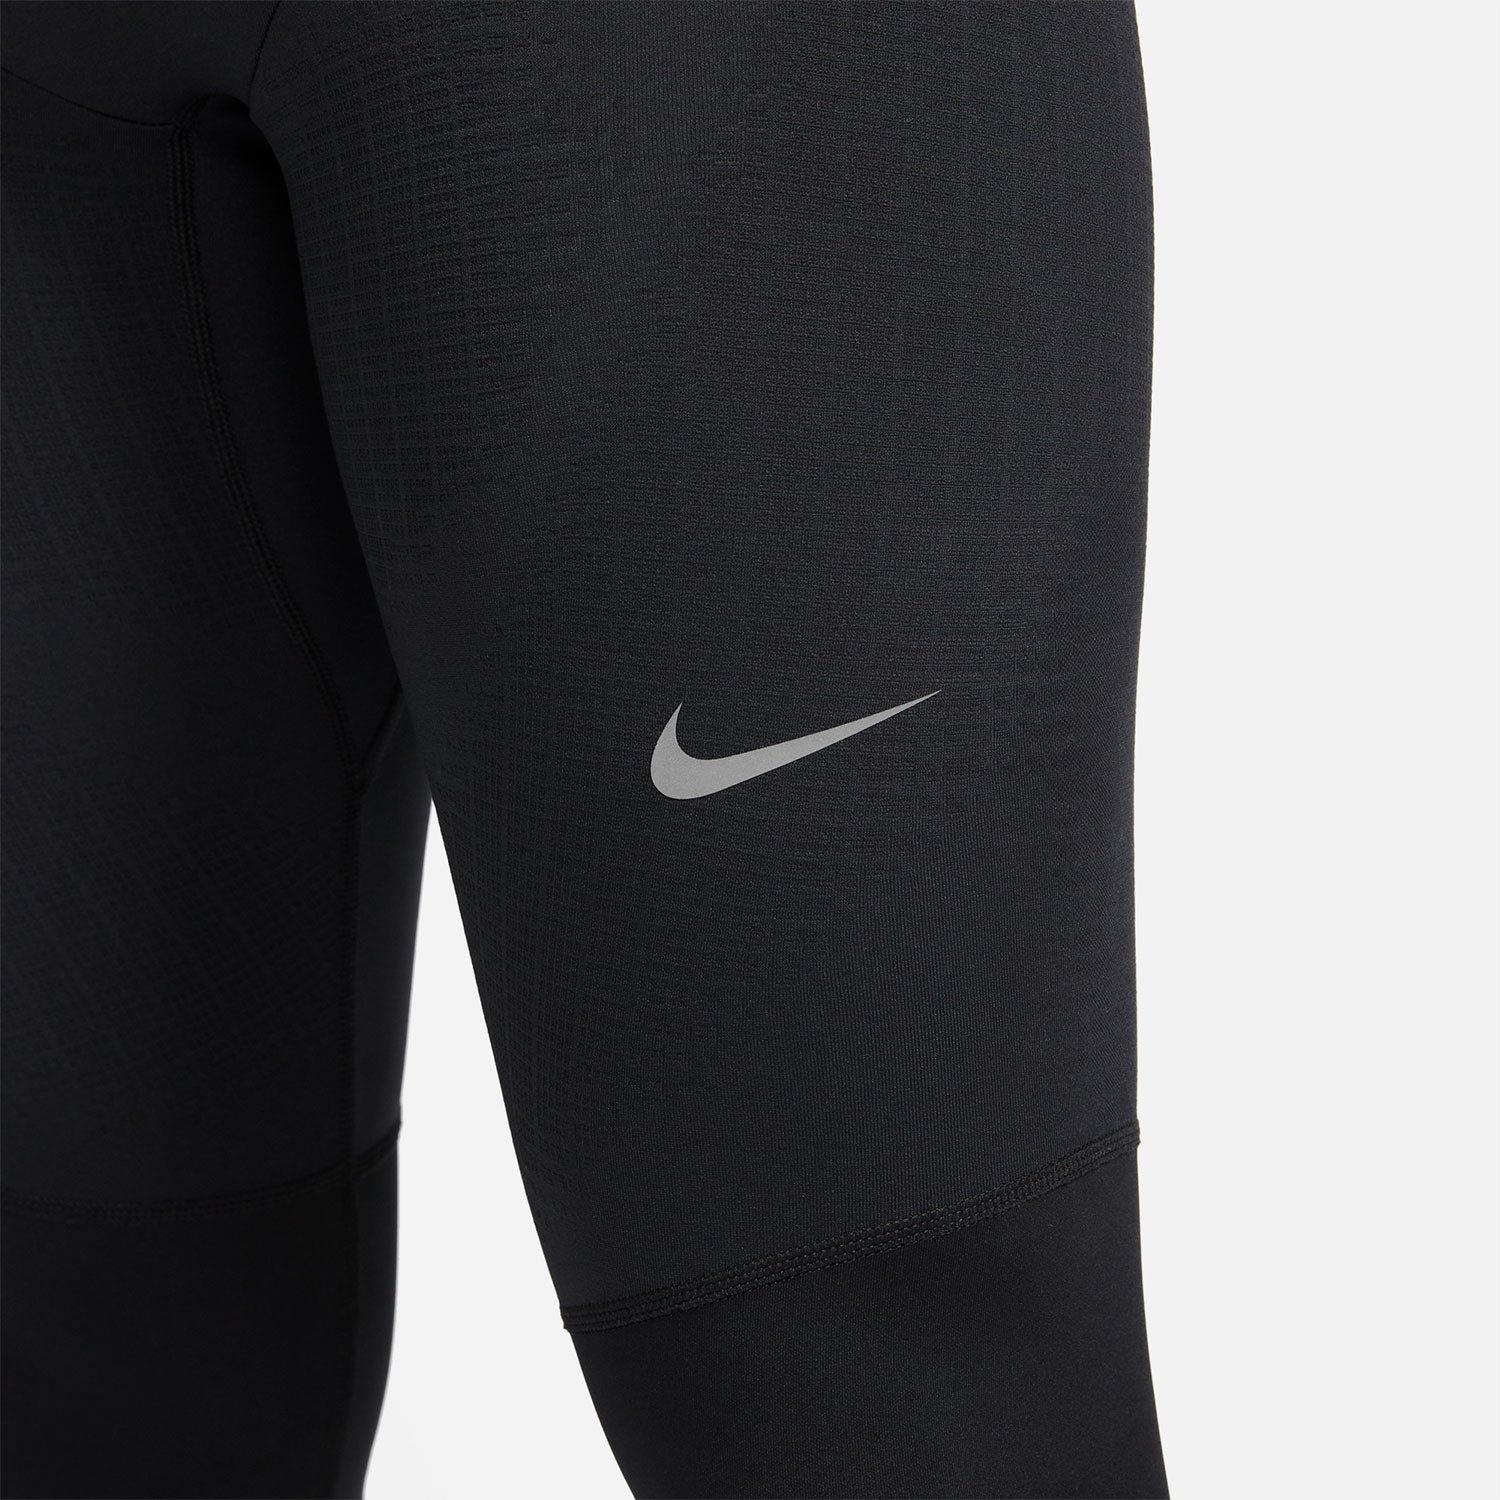 FINNISH] Unboxing I Nike Phenom Elite Men's Running Tights I Targeted  support for your run 